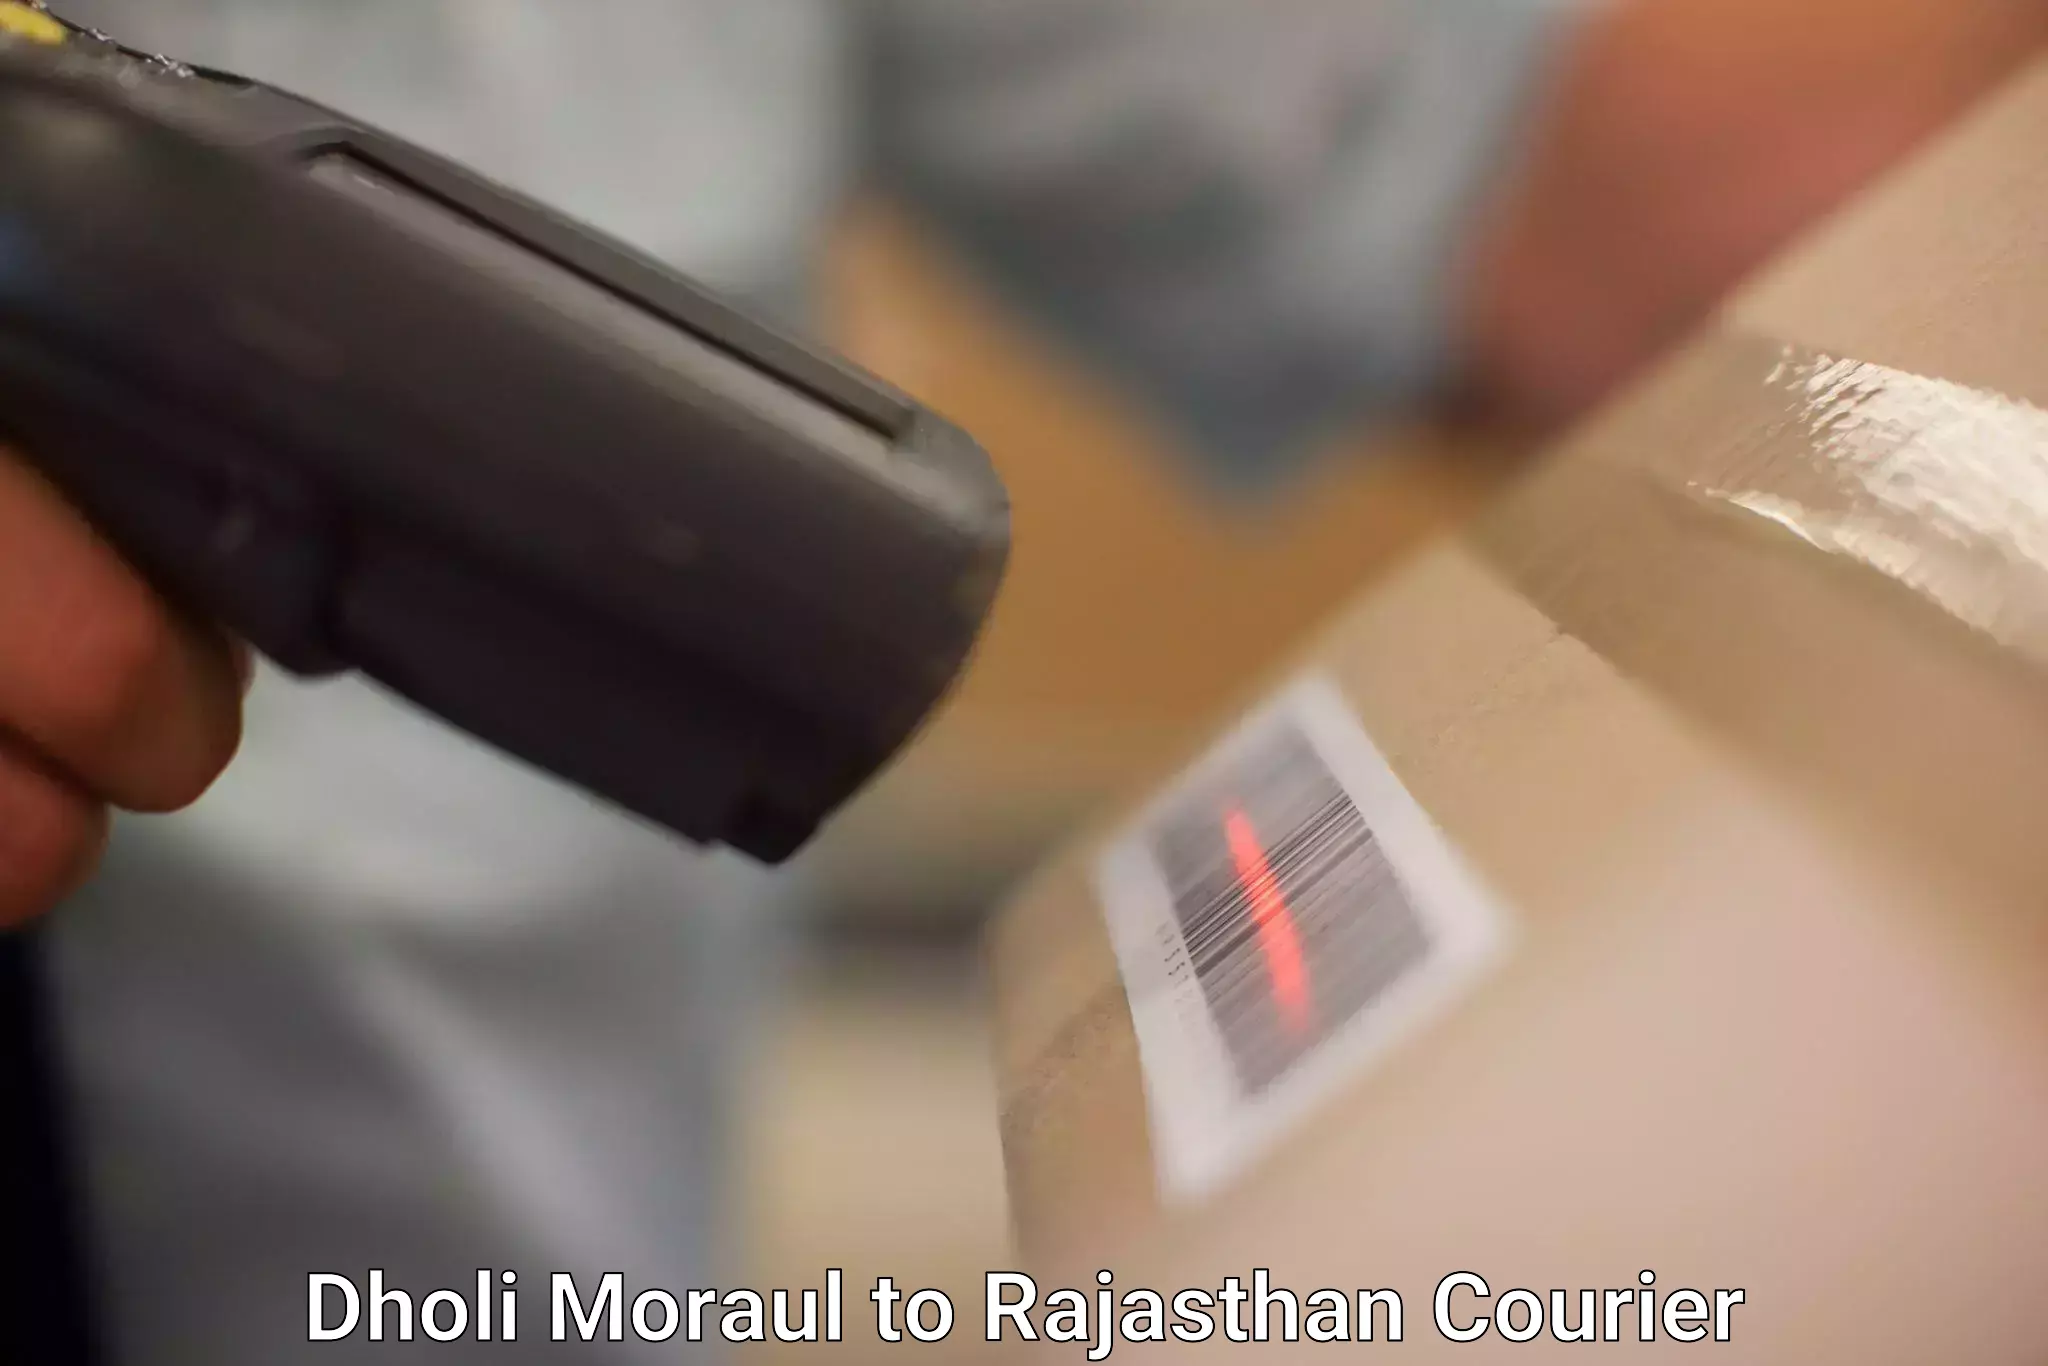 State-of-the-art courier technology Dholi Moraul to Rajasthan